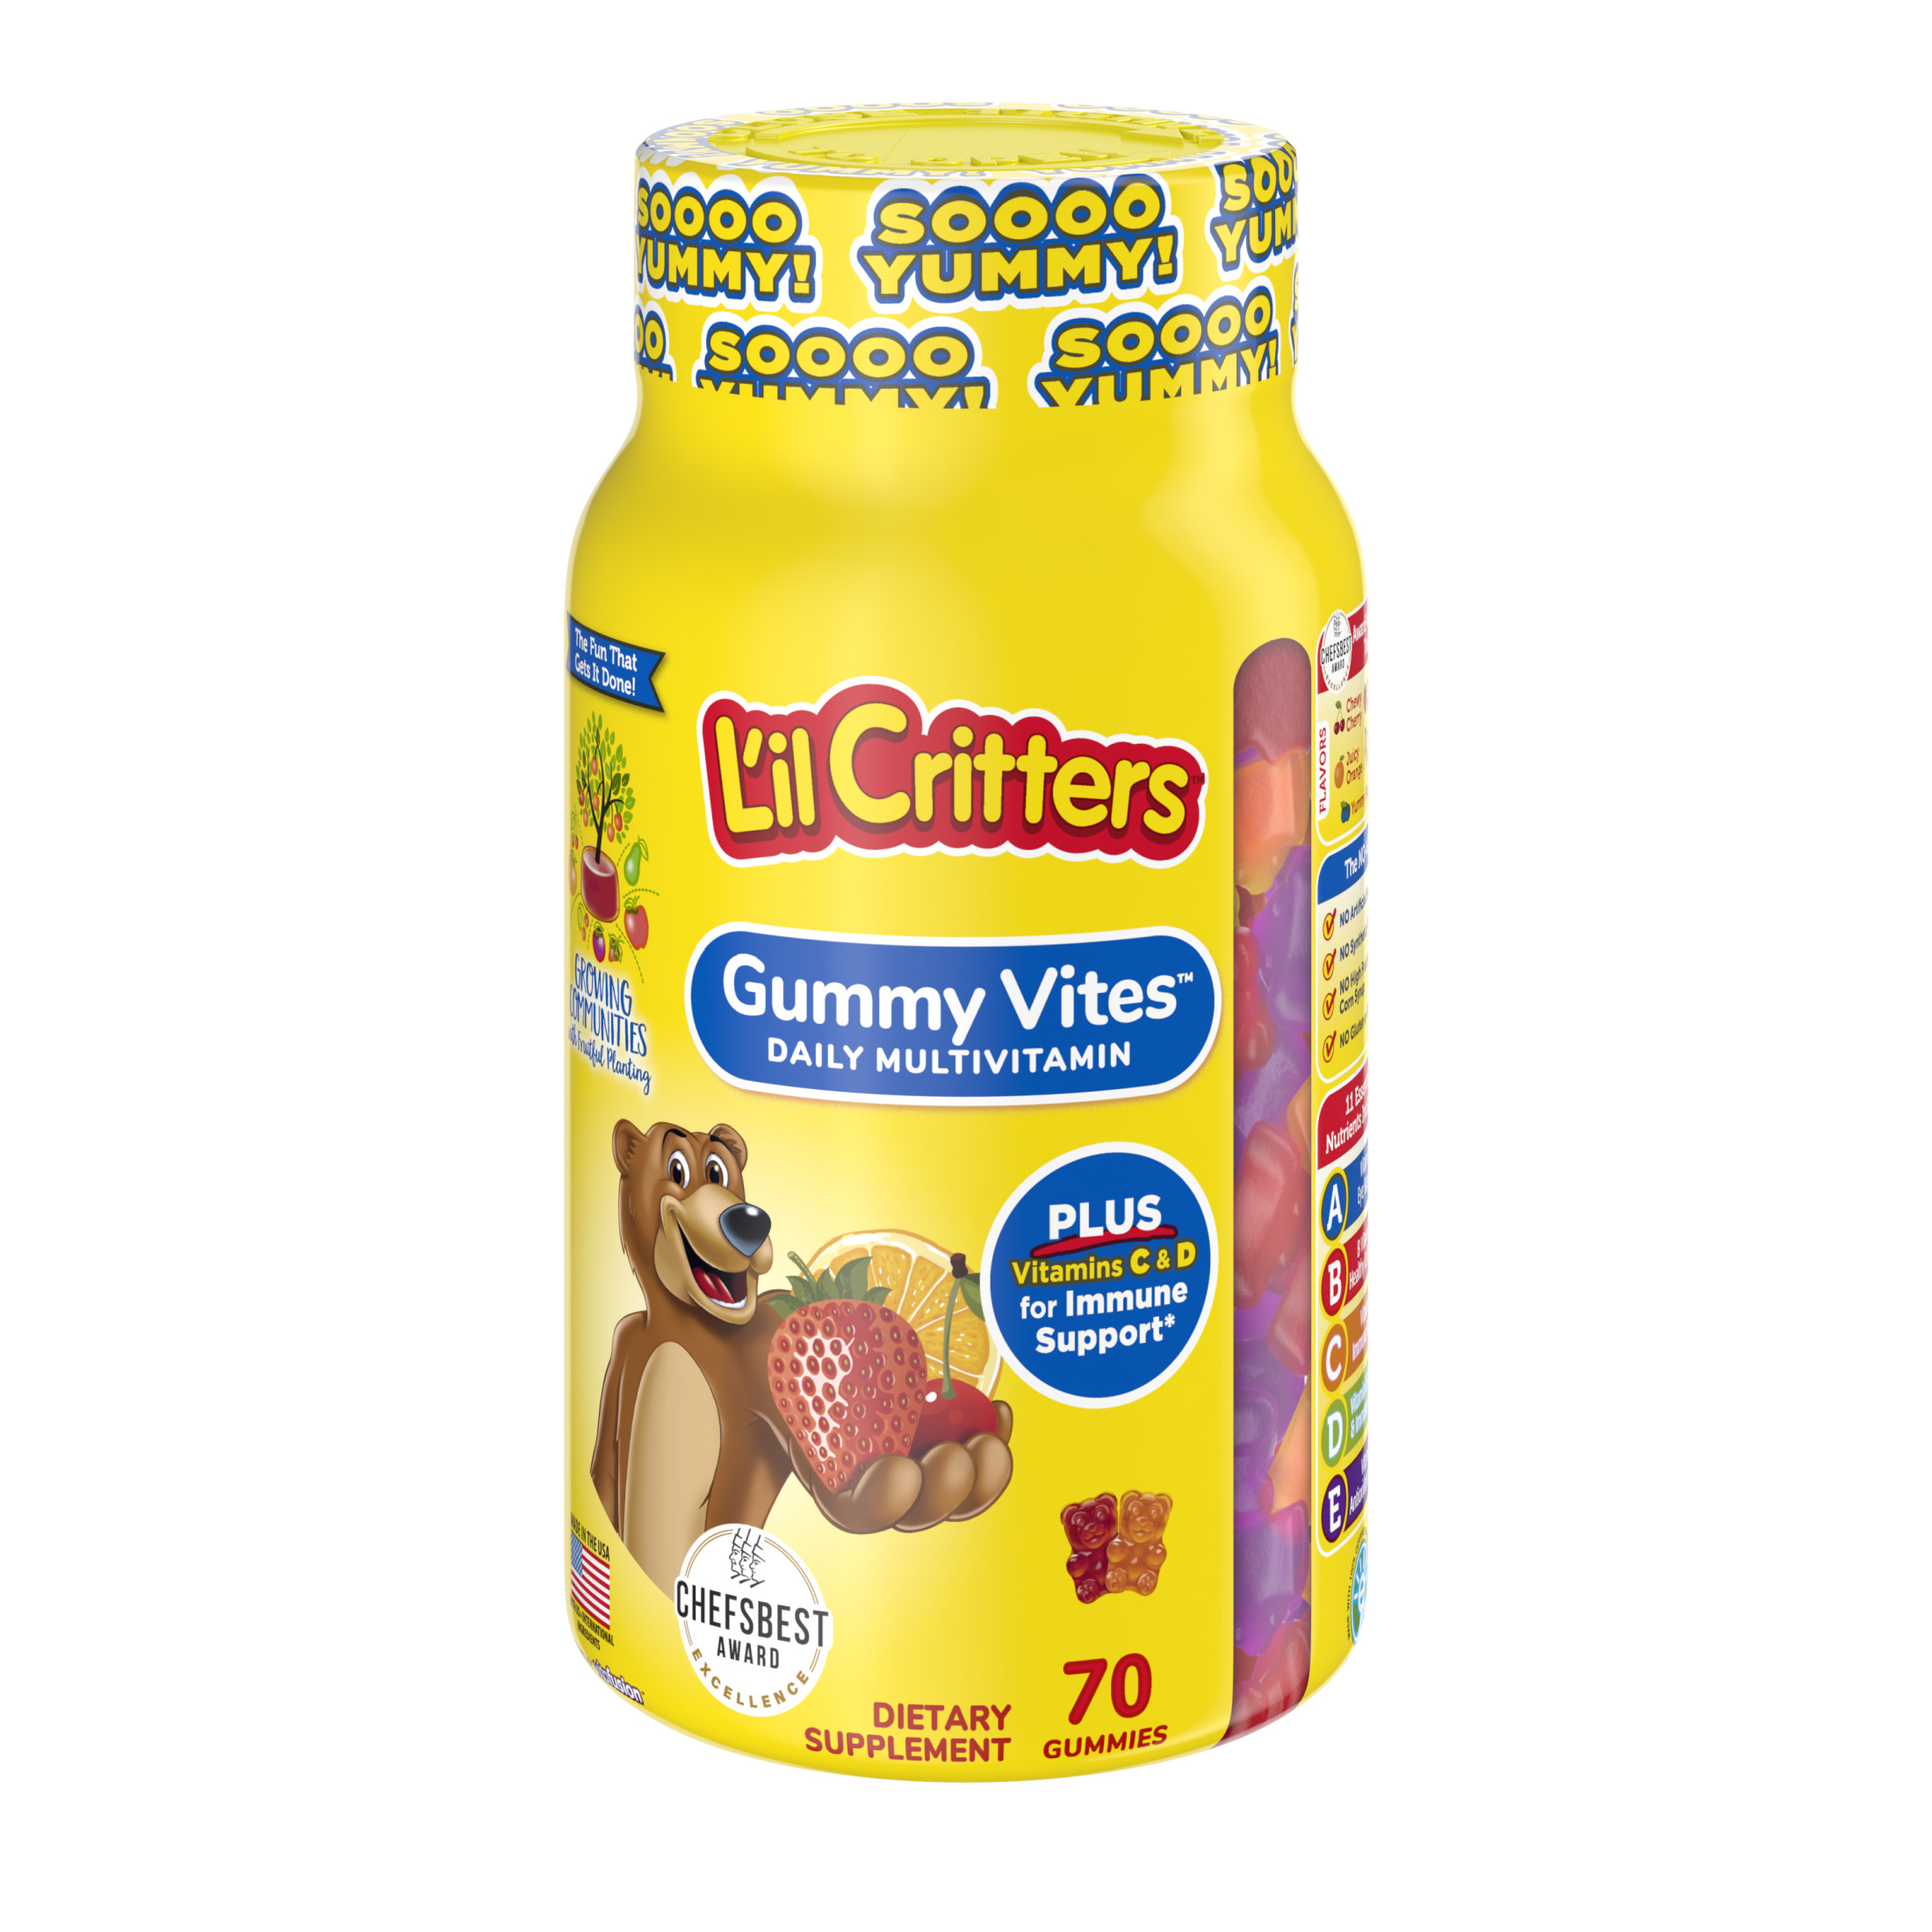 L’il Critters Gummy Vites Daily Gummy Multivitamin for Kids, Vitamin C, D3 for Immune Support Cherry, Strawberry, Orange, Pineapple and Blueberry Flavors, 70 count Gummies - image 1 of 9